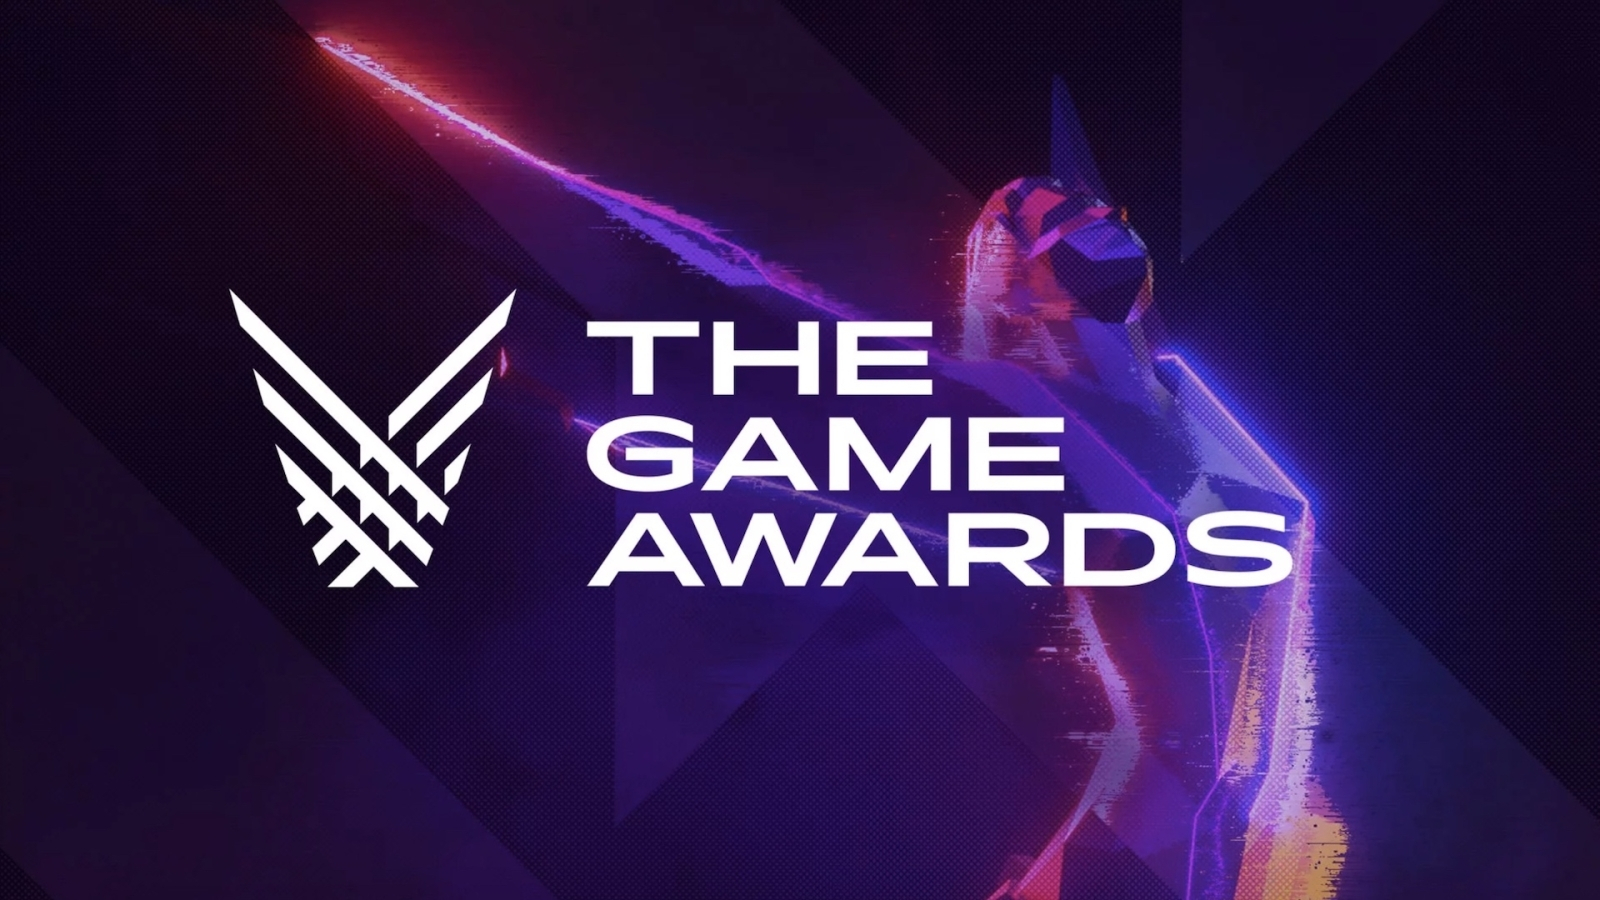 The game Awards